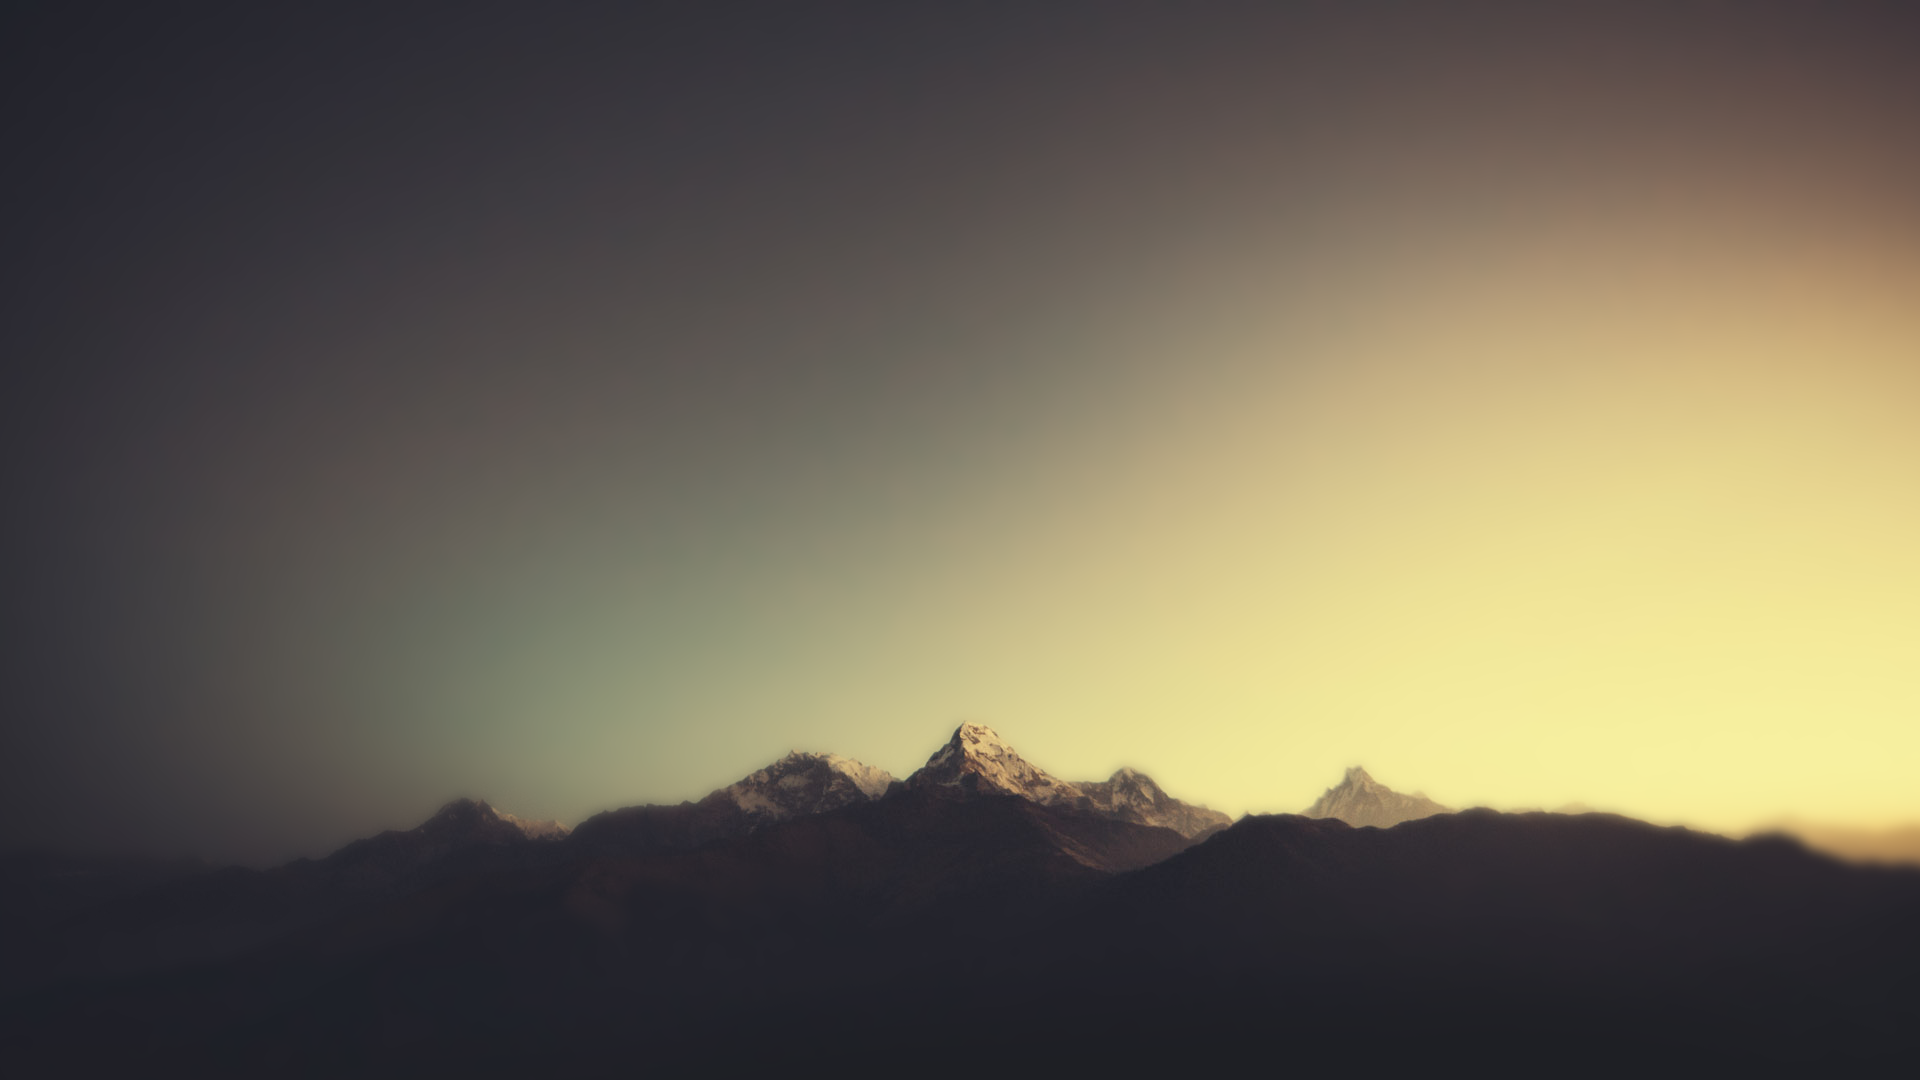 Landscape Mountains Painting Blurred Beige R B 1920x1080